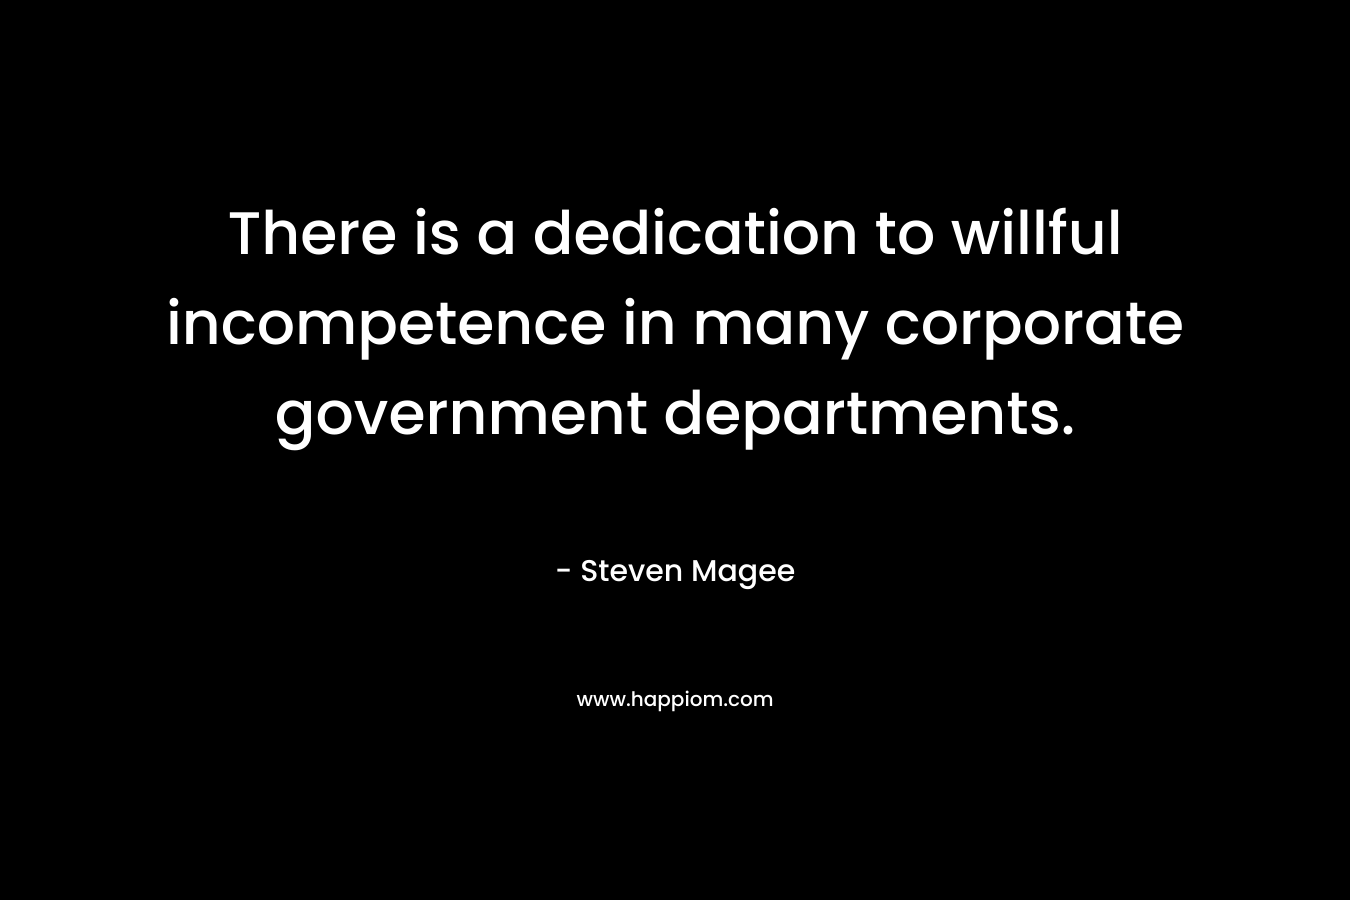 There is a dedication to willful incompetence in many corporate government departments. – Steven Magee